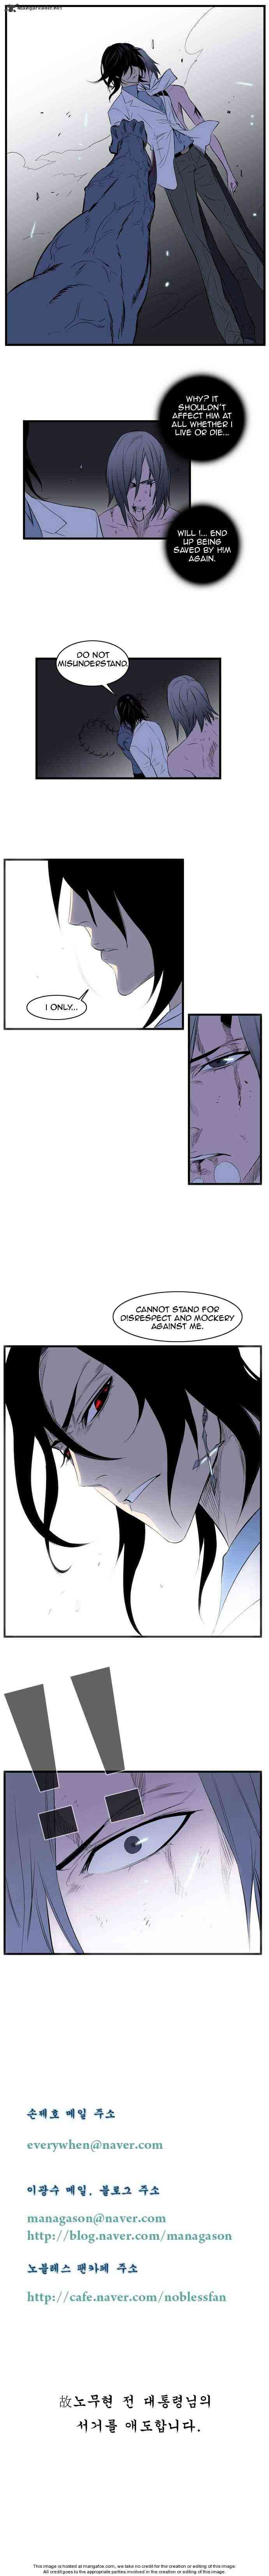 Noblesse Chapter 76 _ Chapters 76-90 page 81